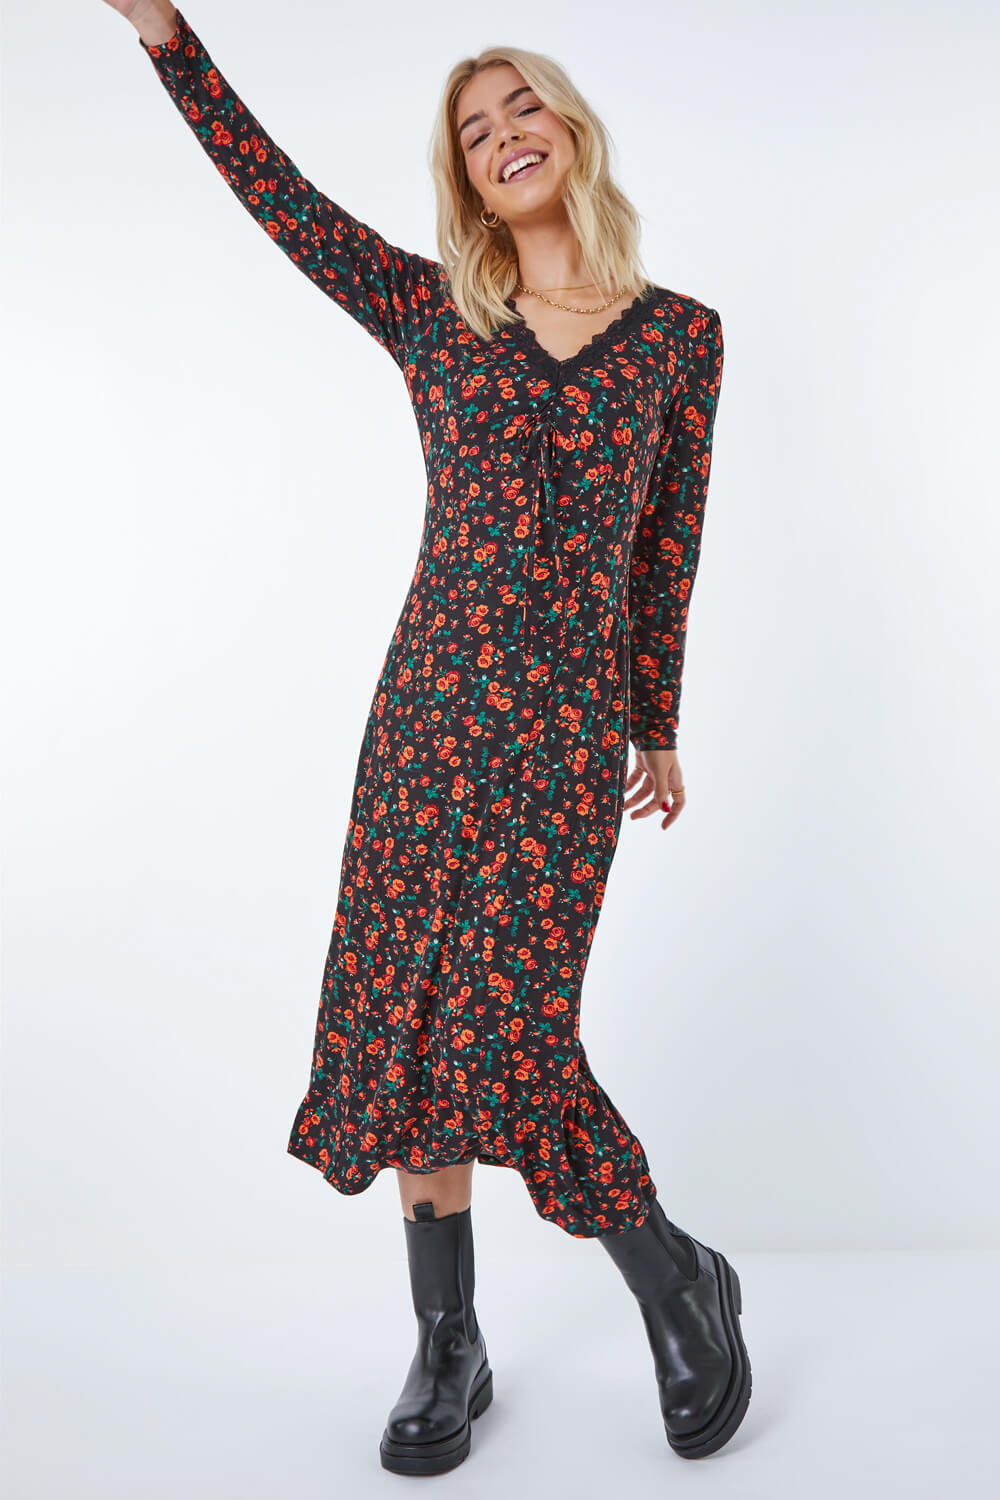 Red Lace Trim Ditsy Floral Midi Dress, Image 2 of 5